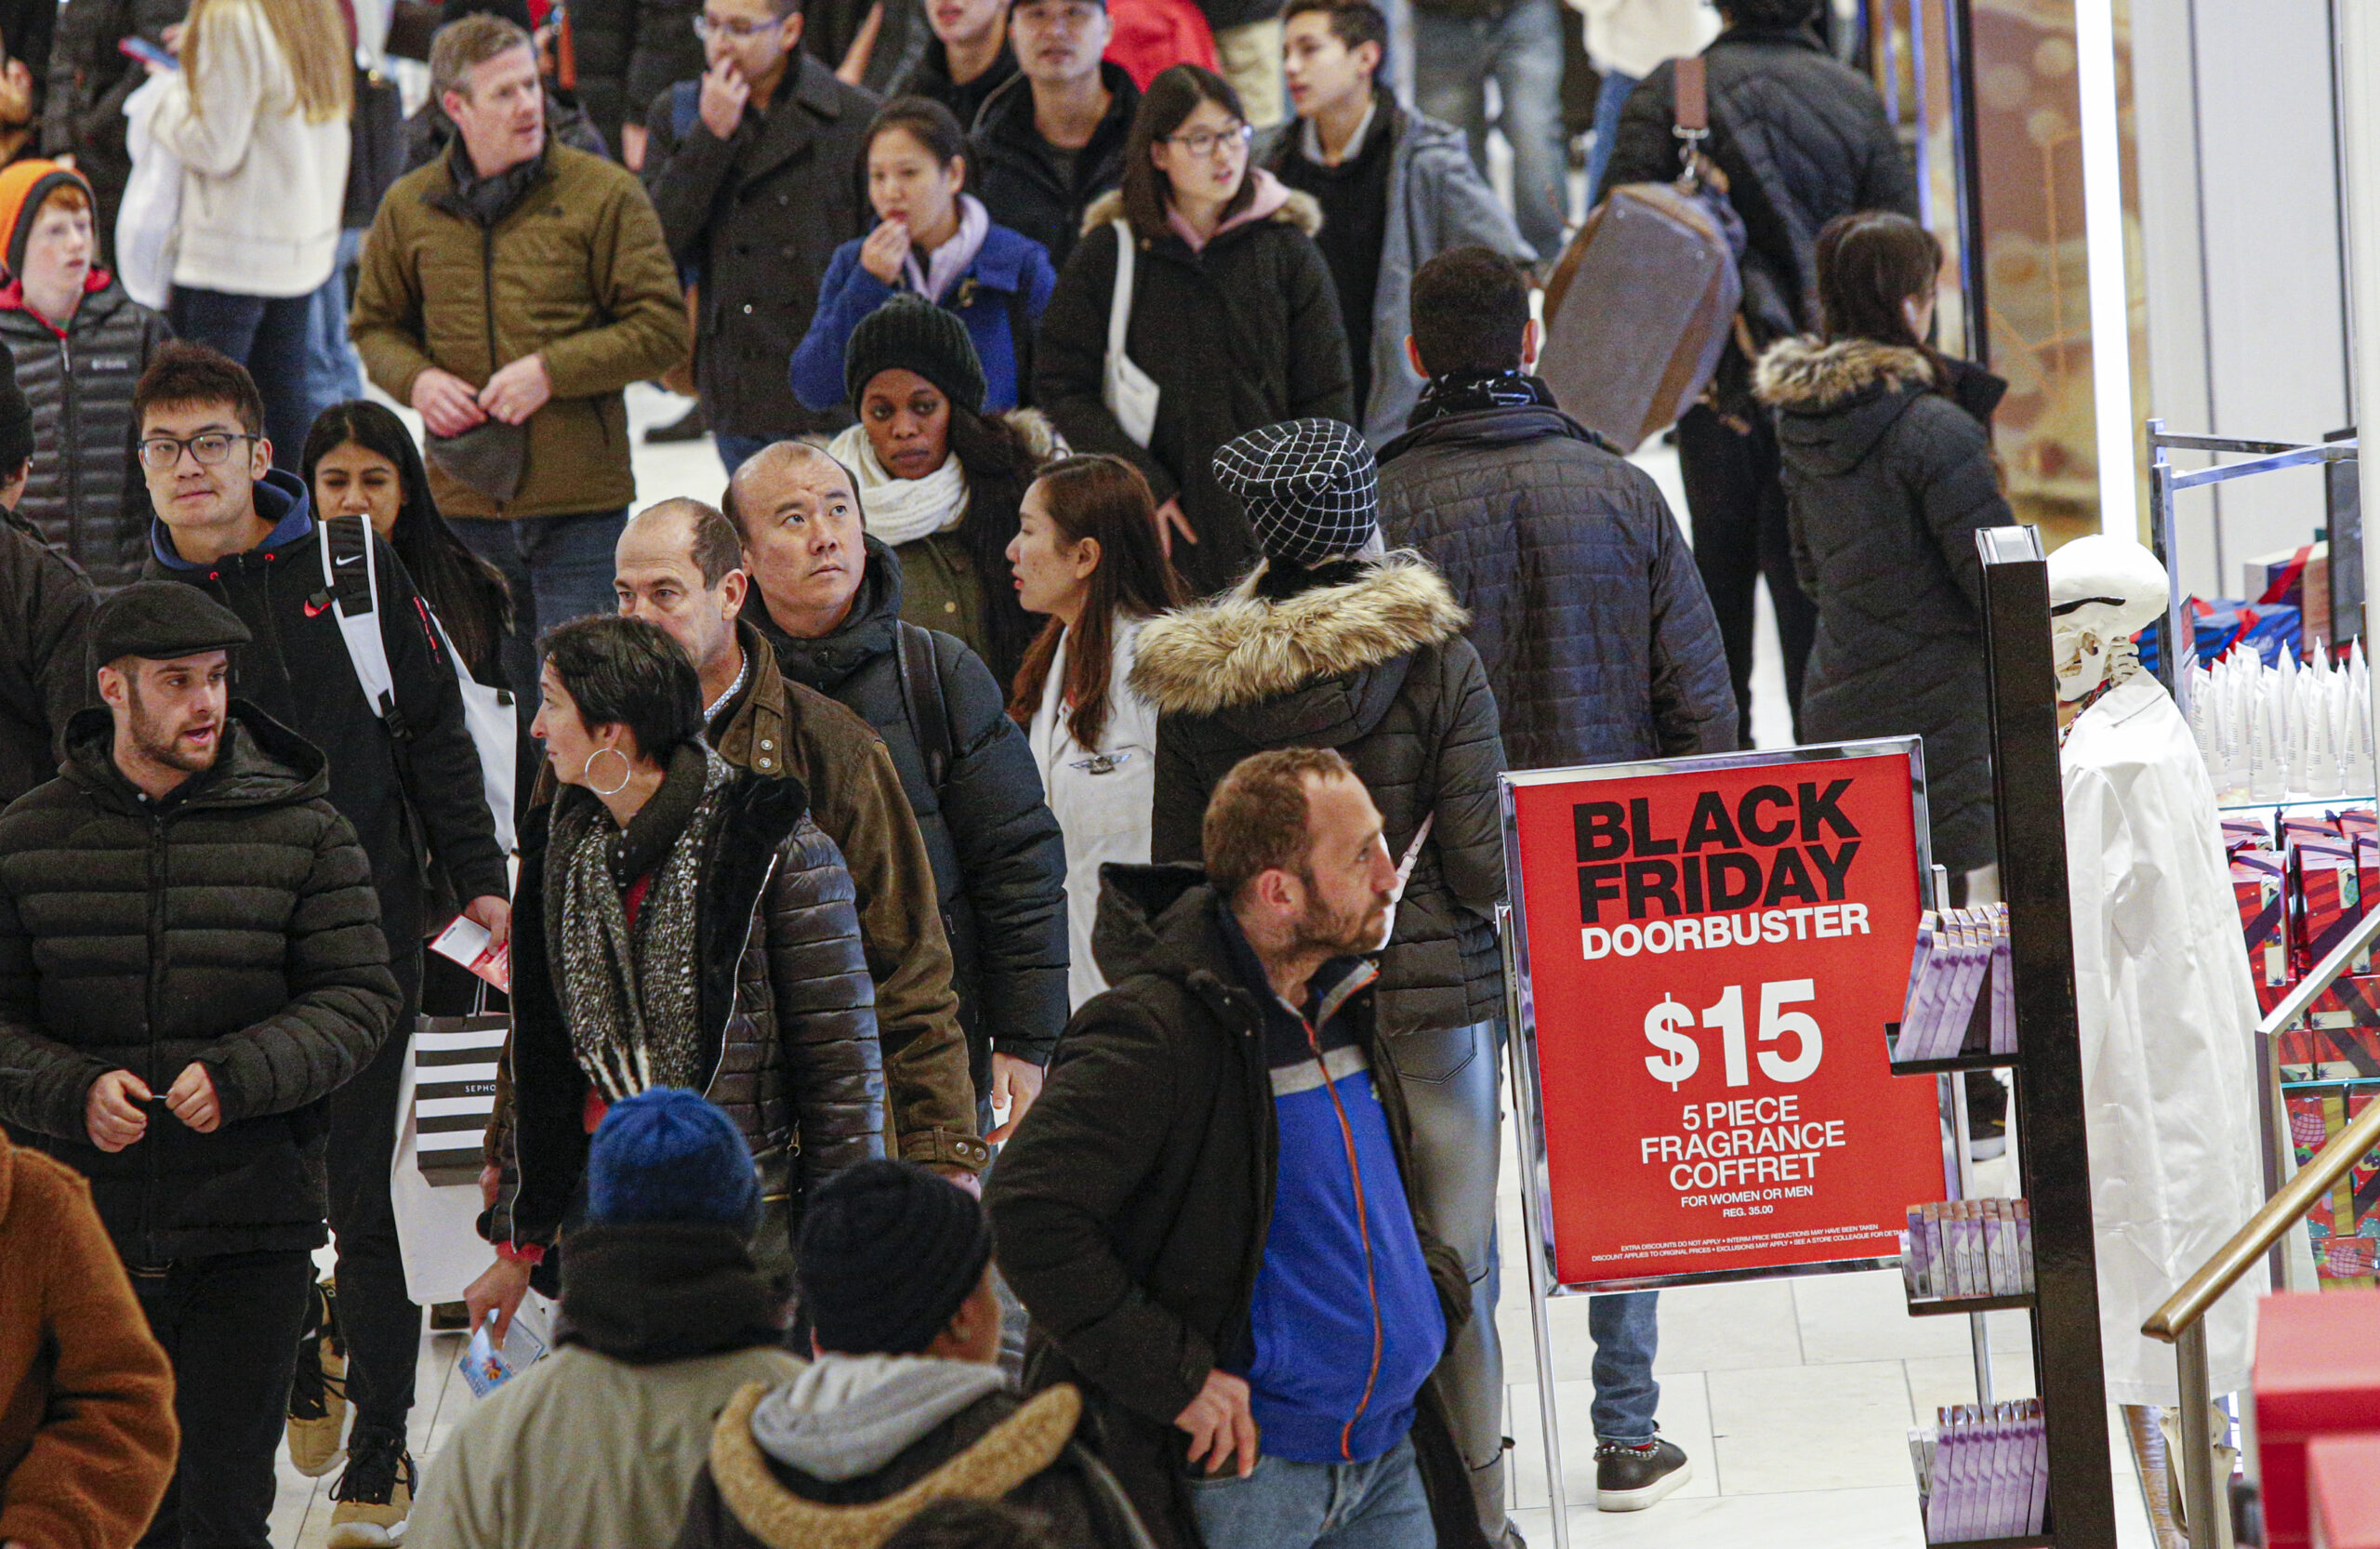 Holiday Shopping During A Pandemic Could The Coronavirus Be The Downfall Of In Store Black Friday